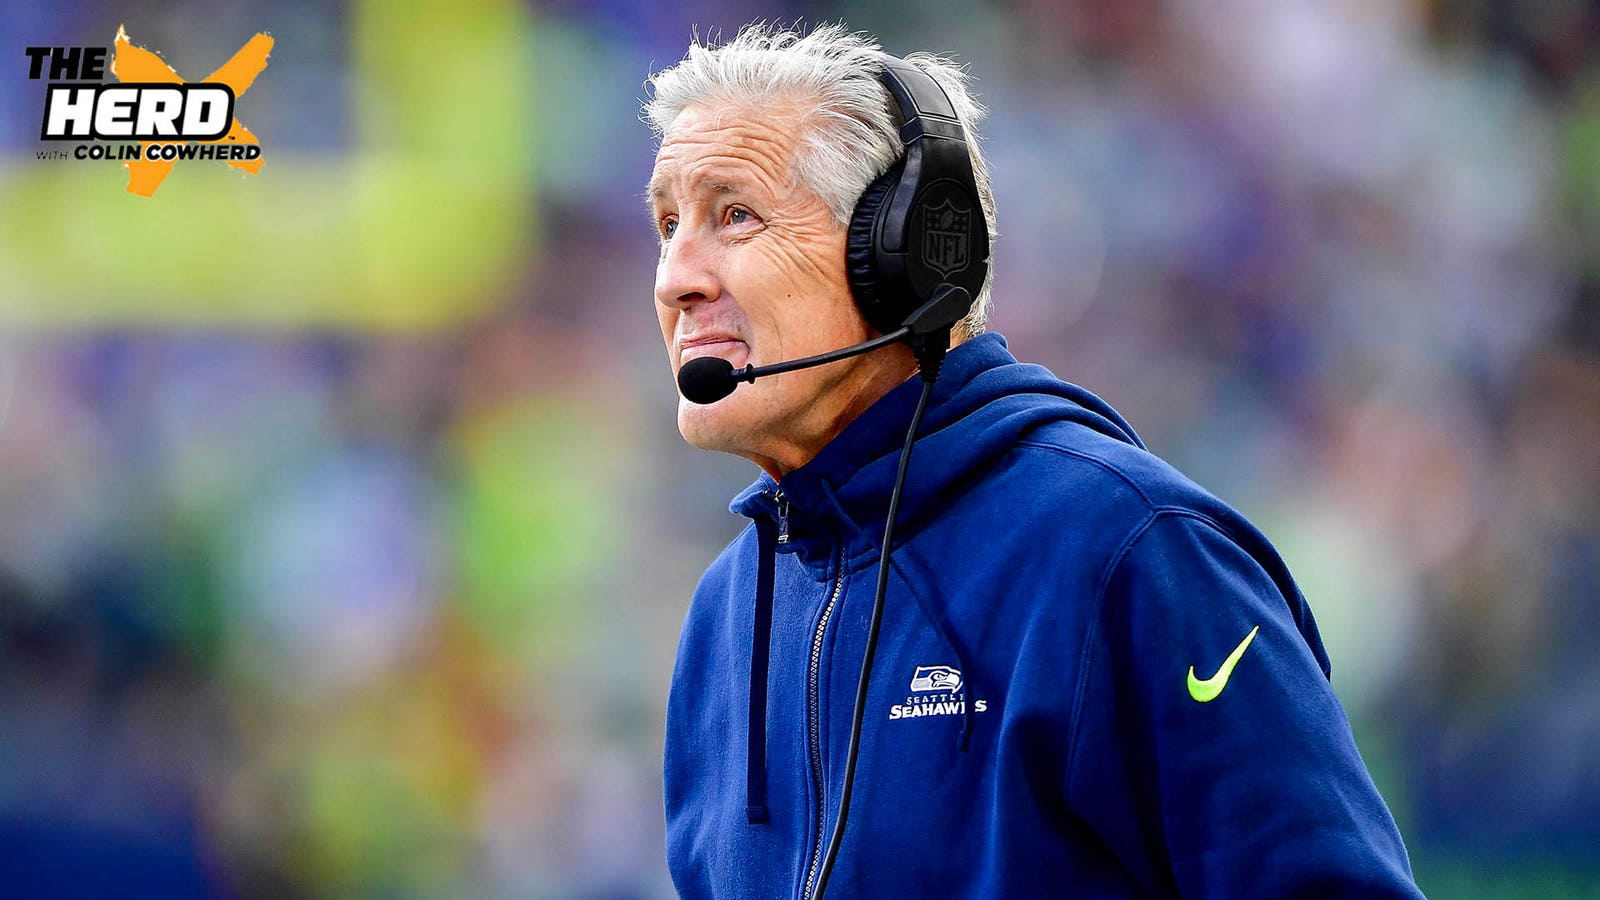 Pete Carroll moves to front office after 14 years as Seahawks coach